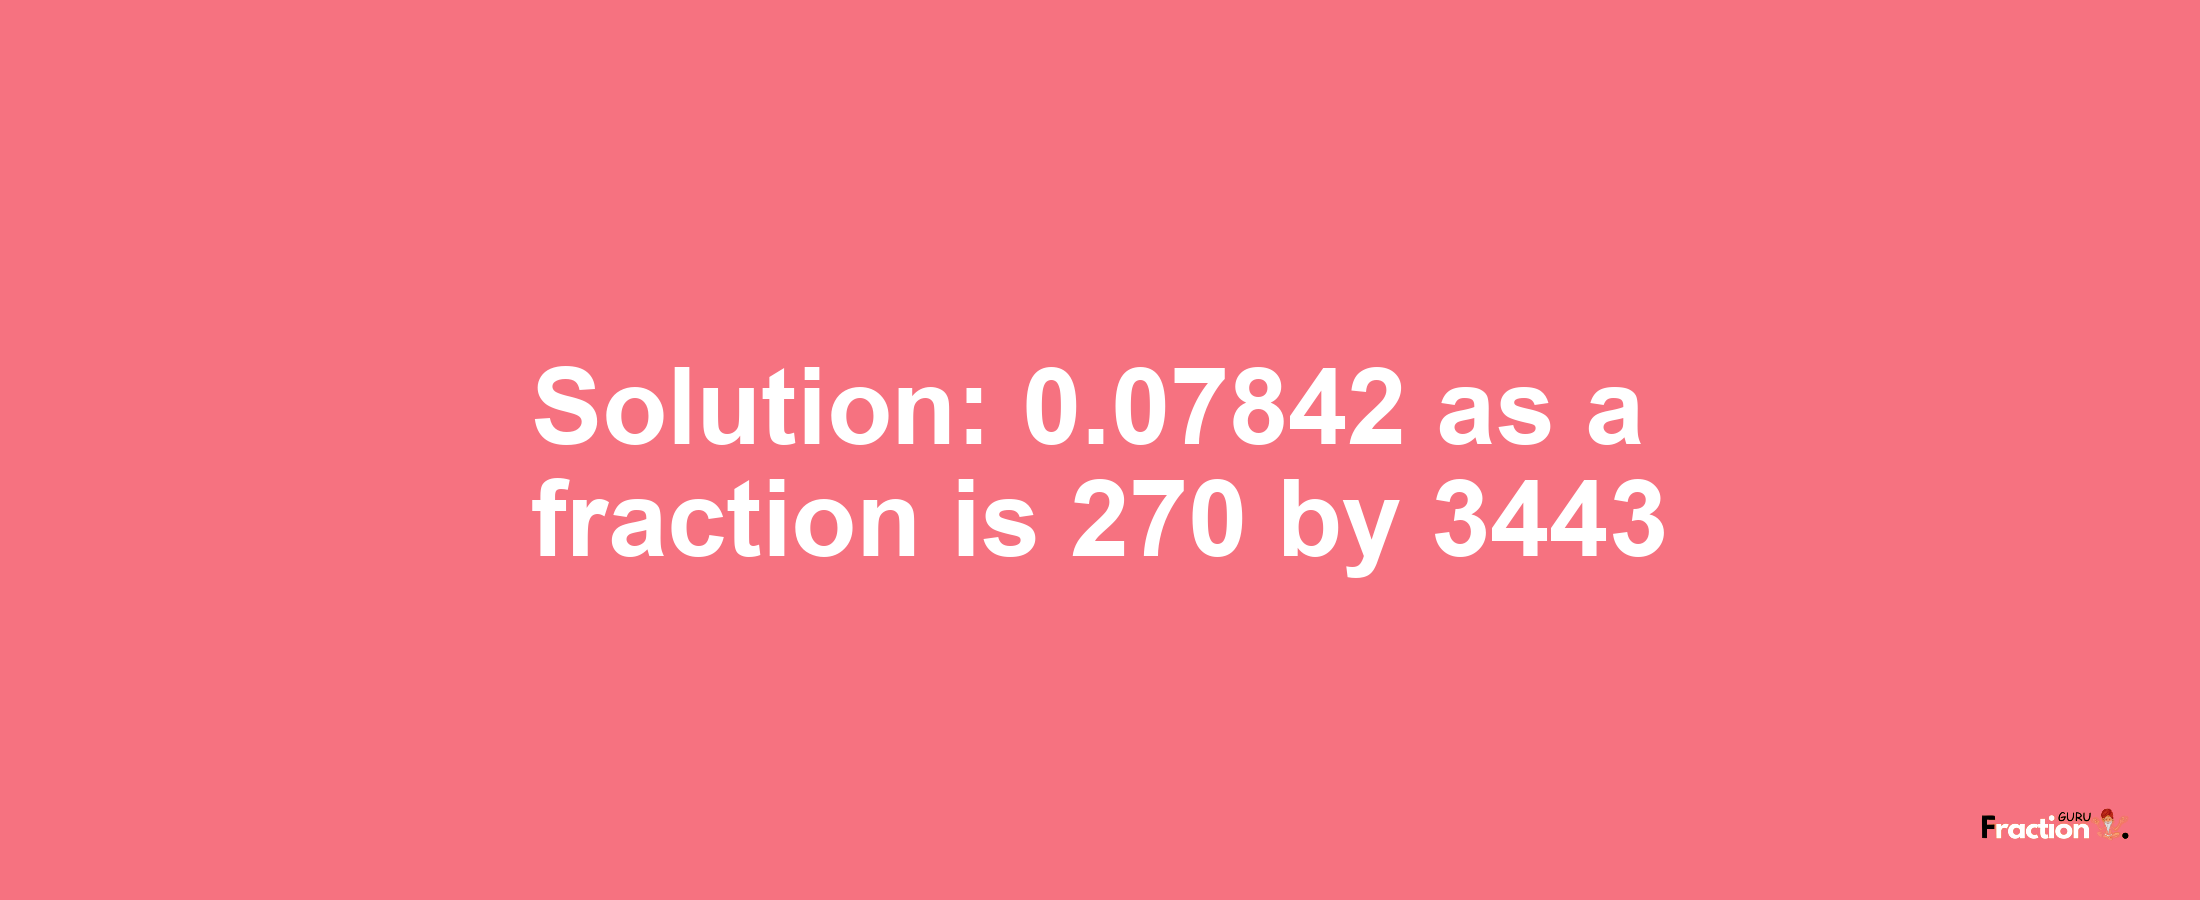 Solution:0.07842 as a fraction is 270/3443